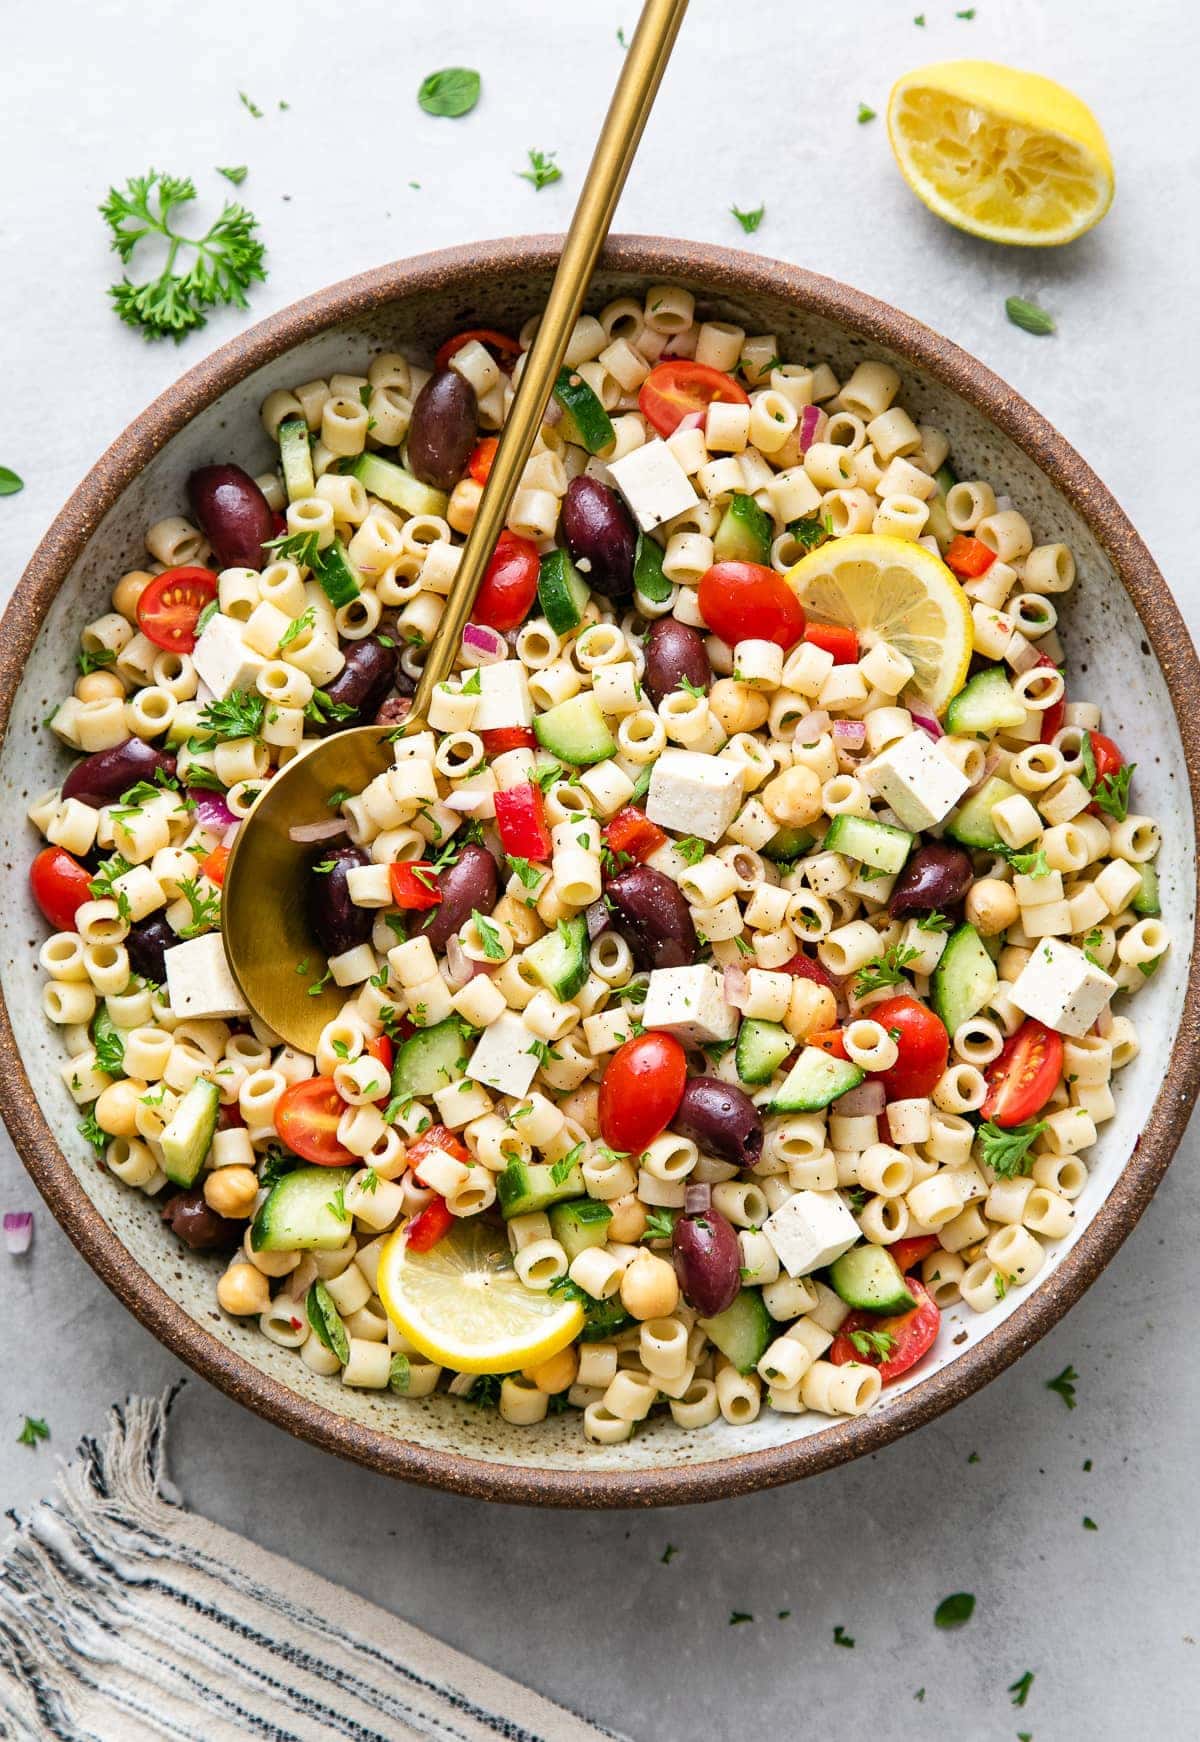 top down view of healthy, vegan Greek pasta salad in a serving bowl with gold serving spoon.